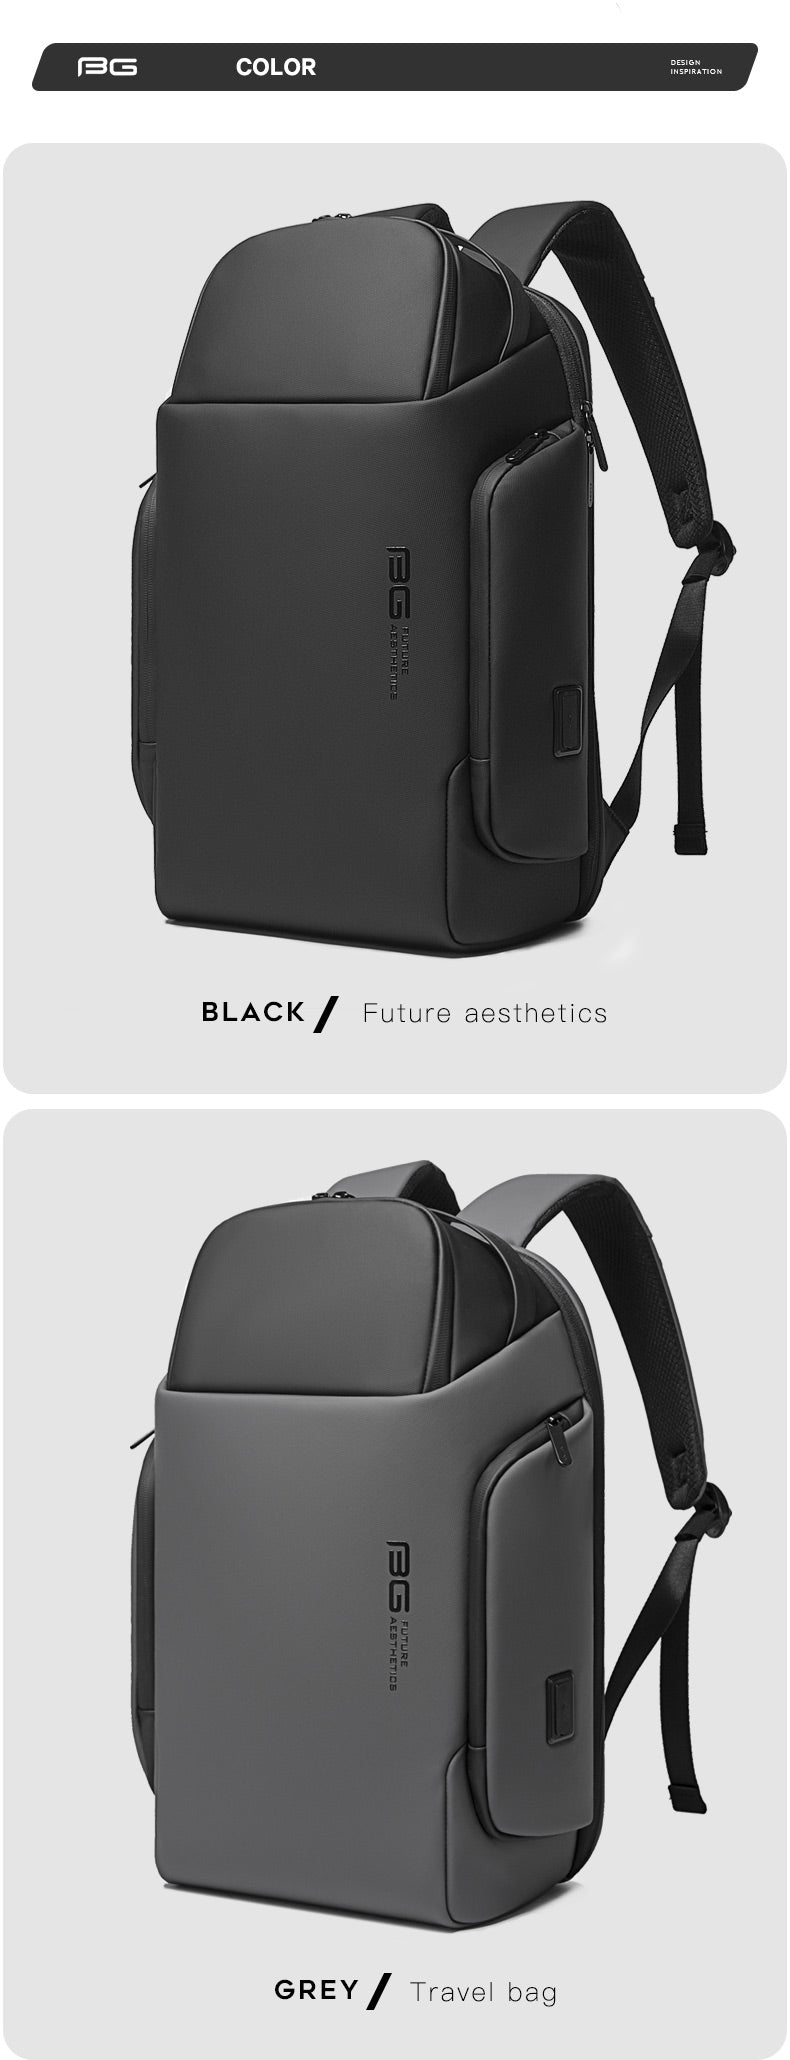 Bange Dire 15.6inch Multi Compartment Future Aesthetic Laptop Backpack